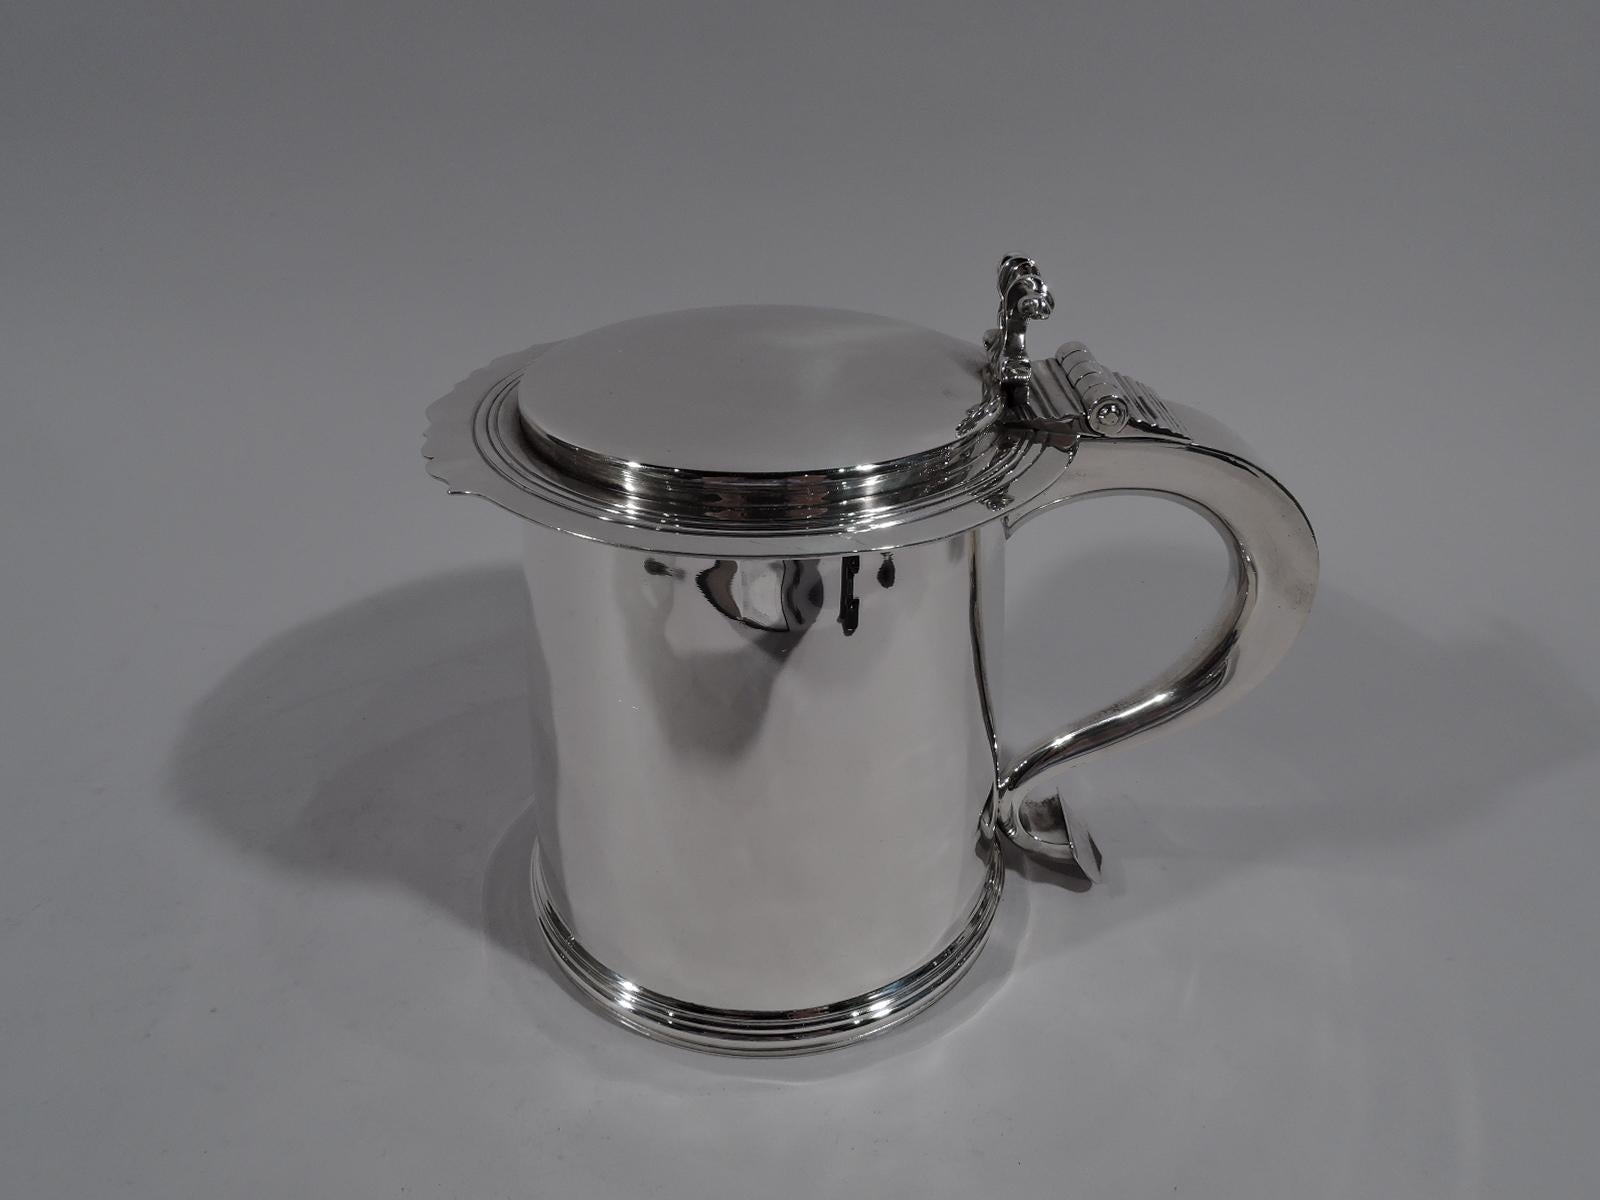 English sterling silver tankard, 1955. Retailed by Tiffany & Co. in England. Drum-form with gently upward tapering sides, molded base, and s-scroll handle with ornamental thumb rest. Cover flat, raised, and overhanging with tooled bands and